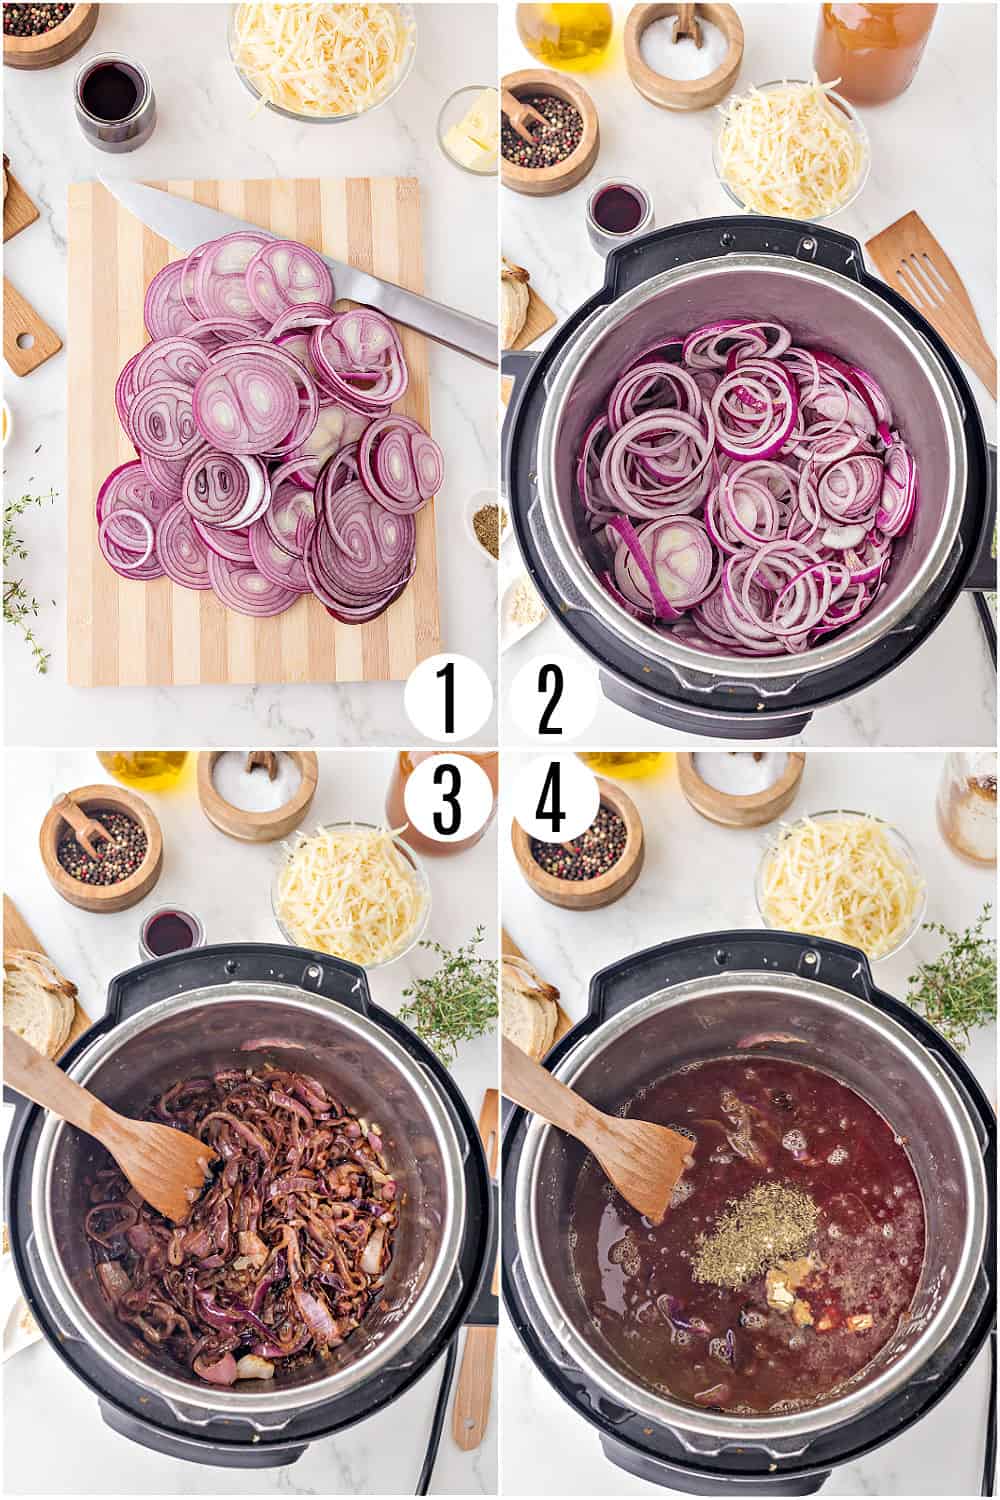 Step by step photos showing how to make instant pot french onion soup.